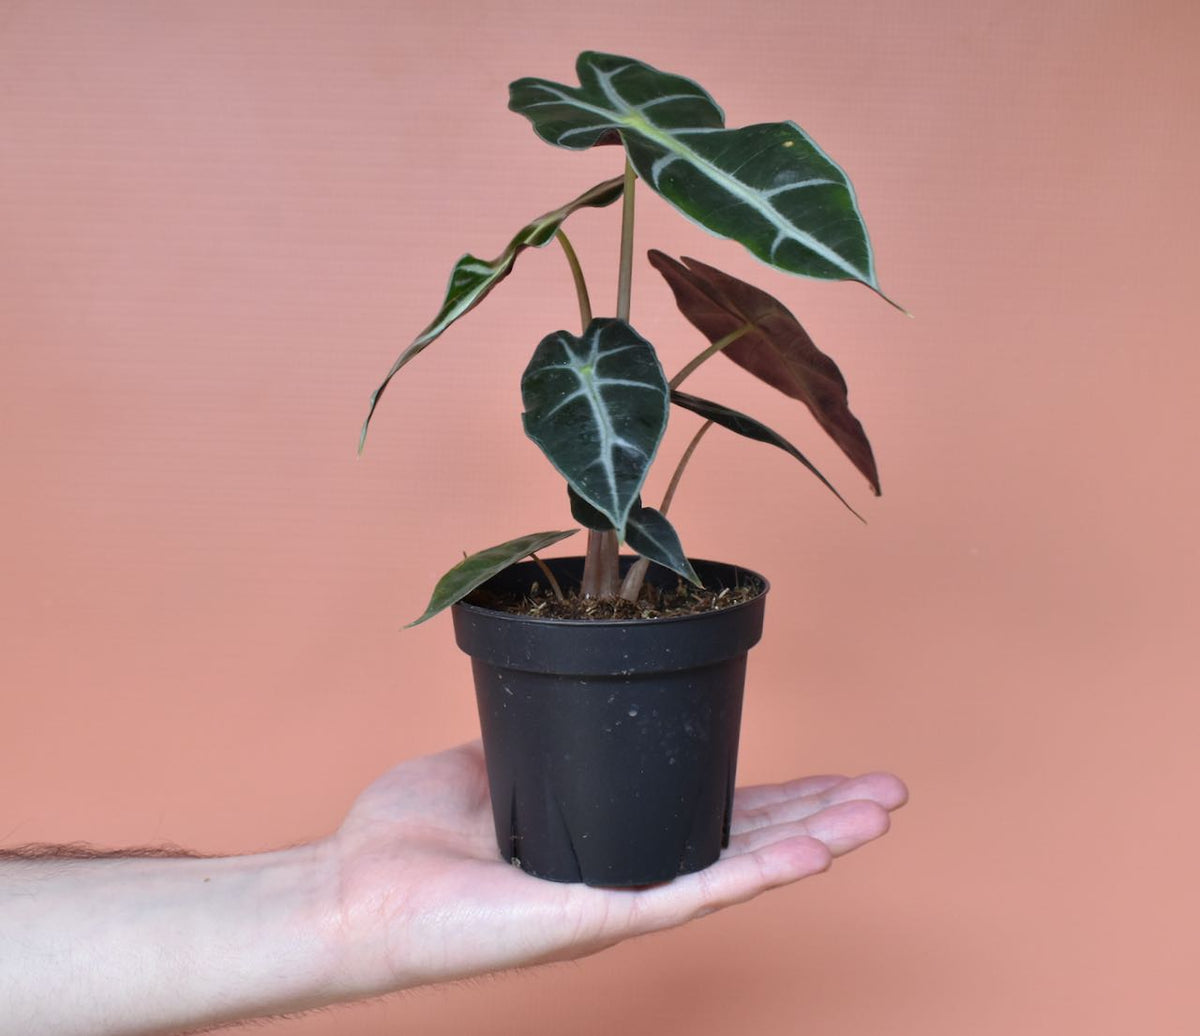 Hand holding Alocasia Amazonica 'Polly' in plastic grow pot in front of pink background.